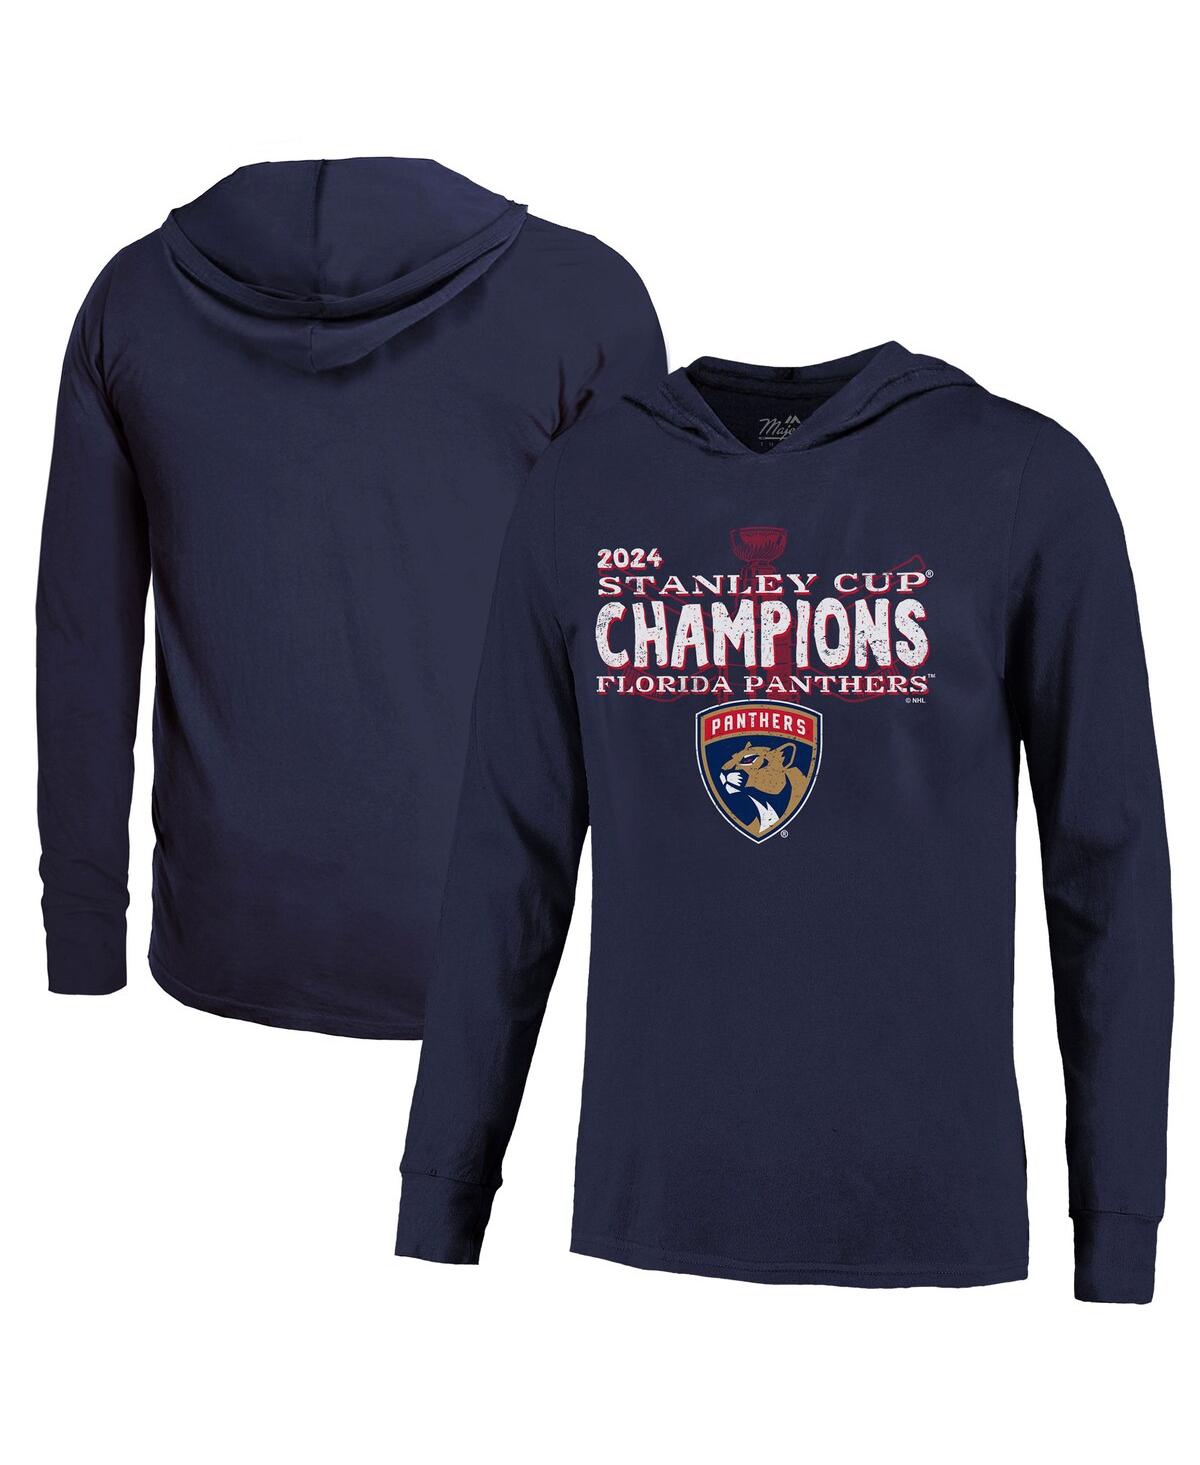 Men's Navy Florida Panthers 2024 Stanley Cup Champions Softhand Long Sleeve Pullover Hoodie - Navy